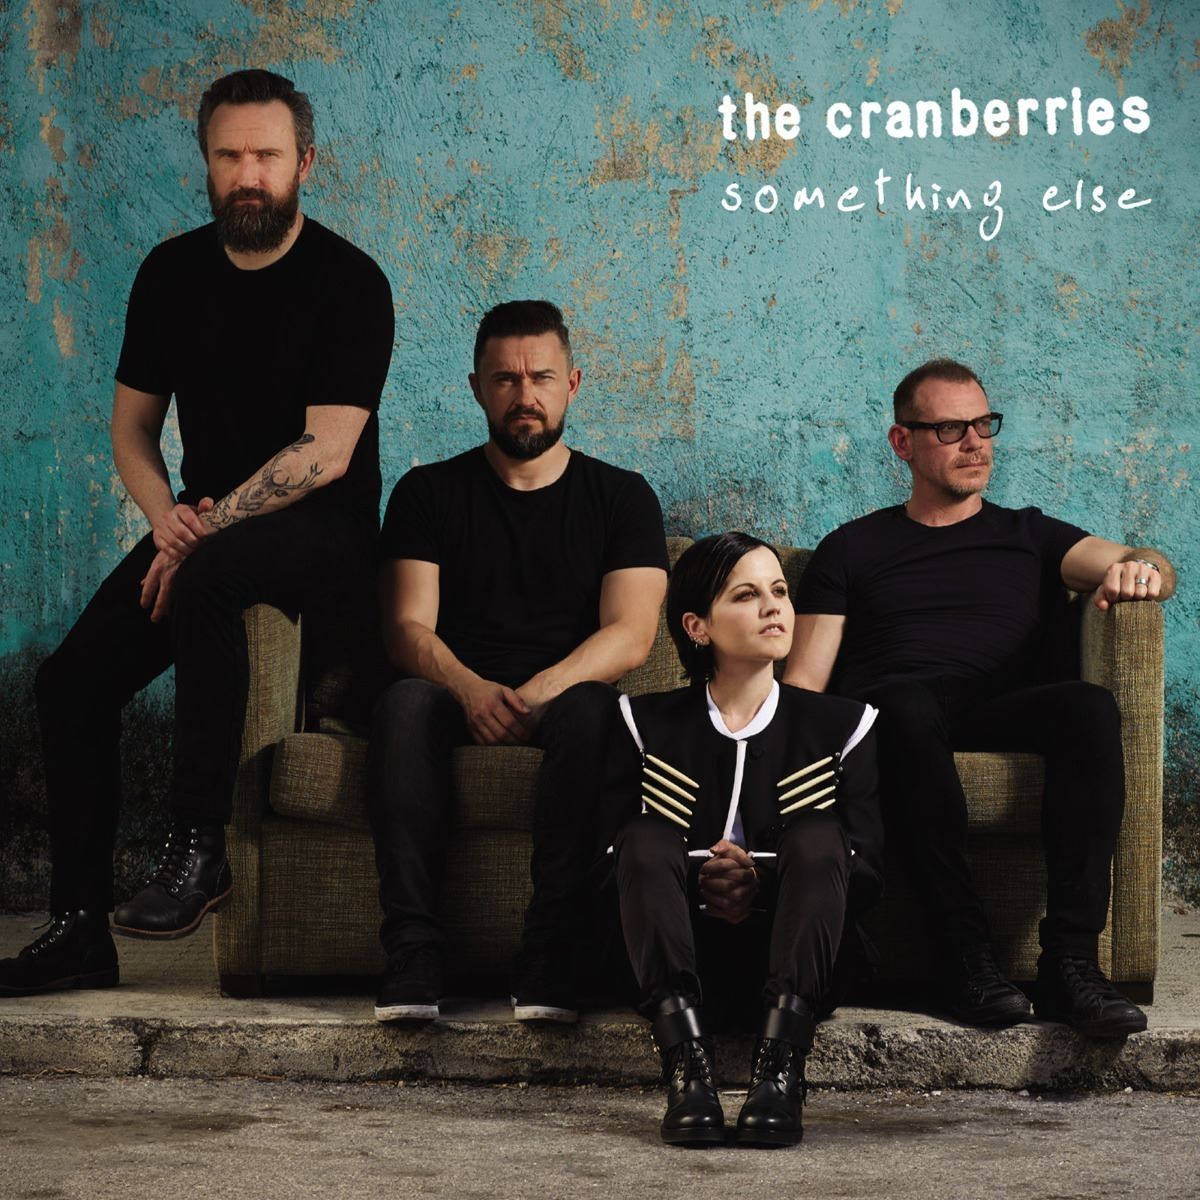 Zombie - The Cranberries - Cifra Club